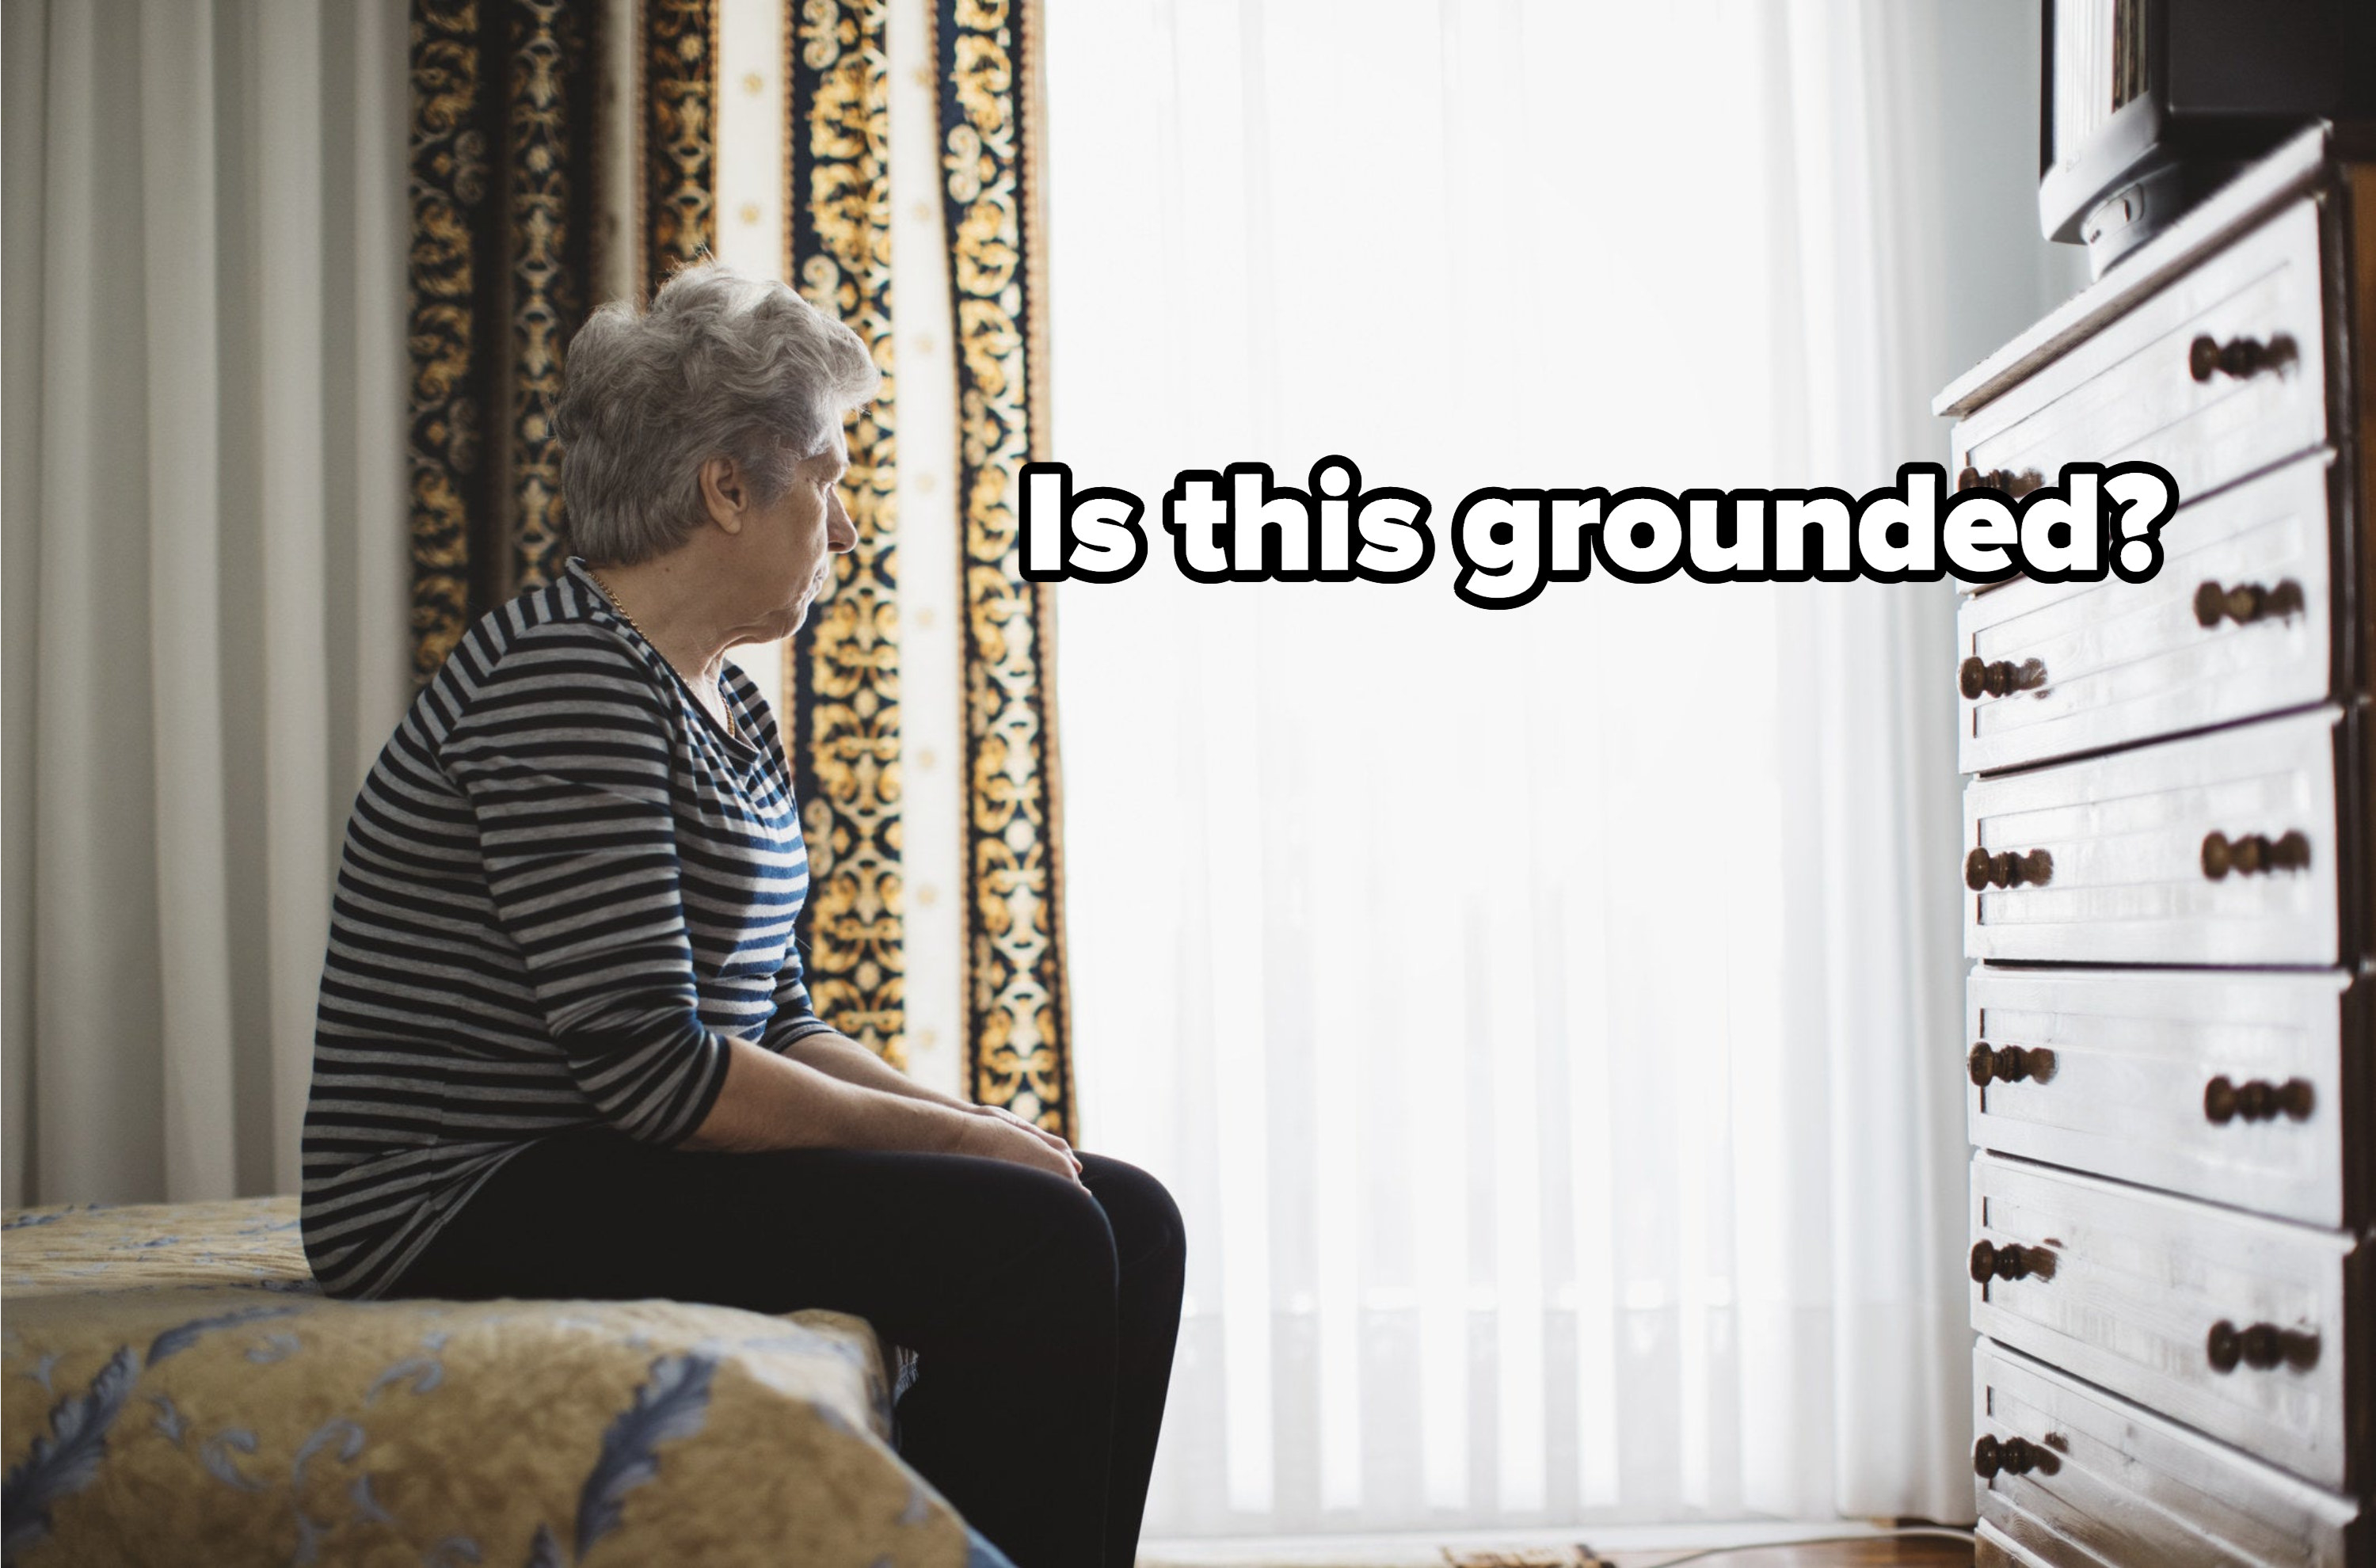 an old woman alone in a room contemplating grounded